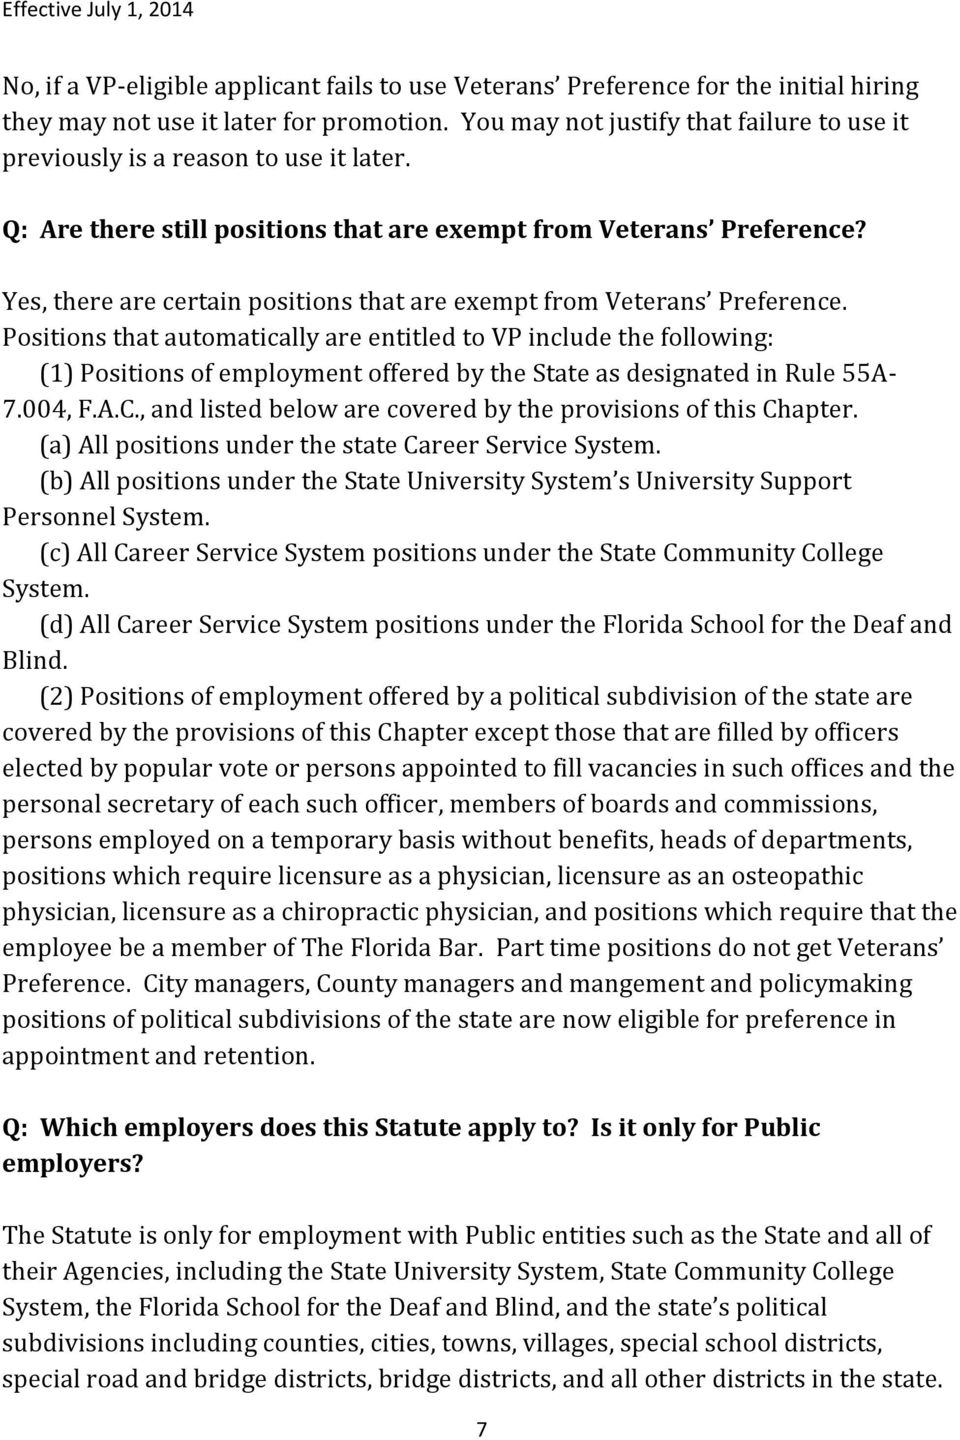 Yes, there are certain positions that are exempt from Veterans Preference.